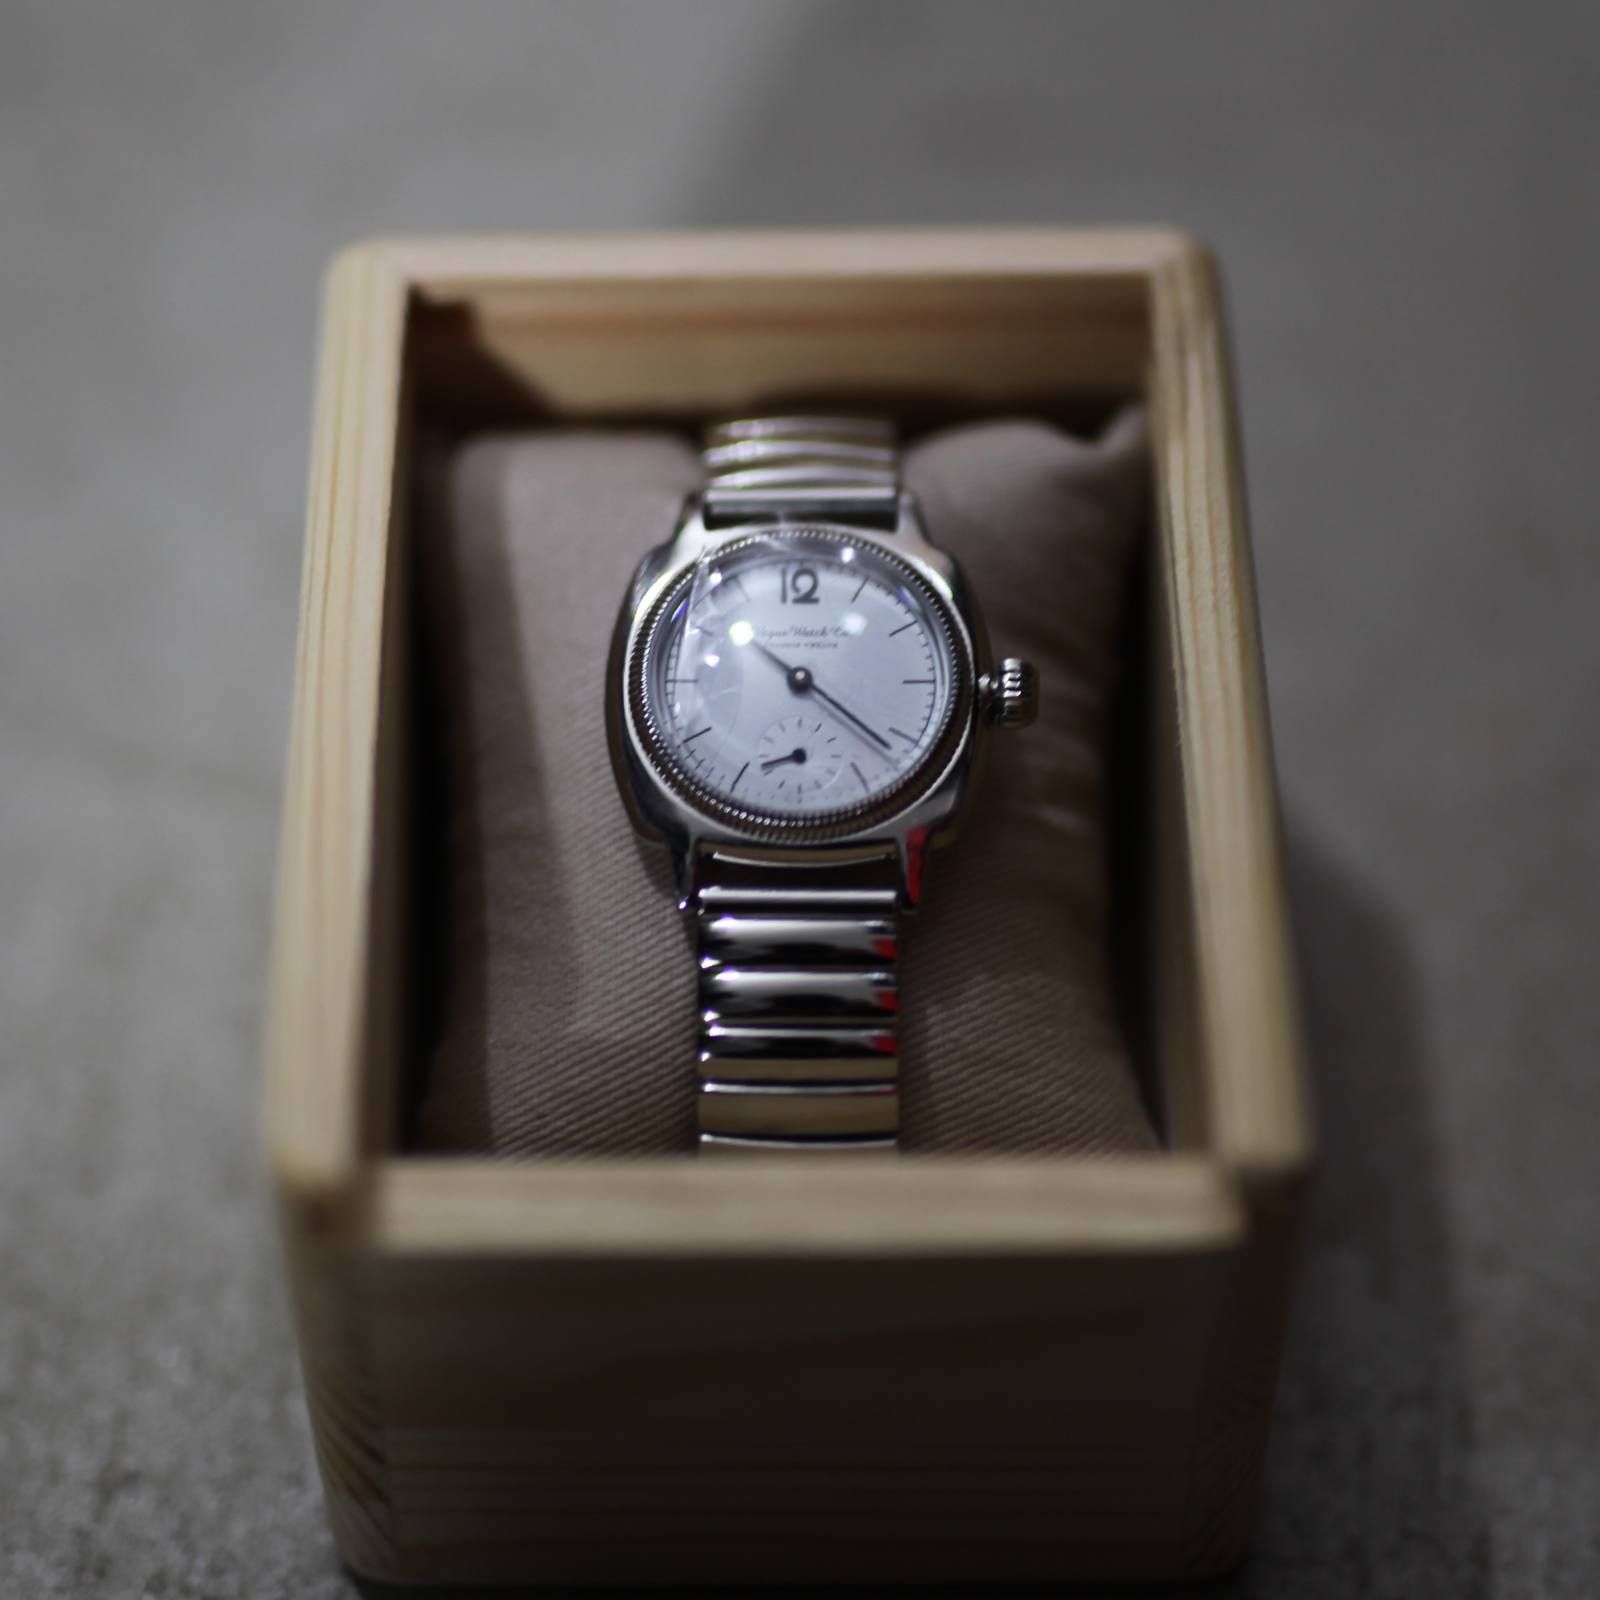 VAGUE WATCH CO. - 【お取り寄せ注文可能】 COUSSIN 12